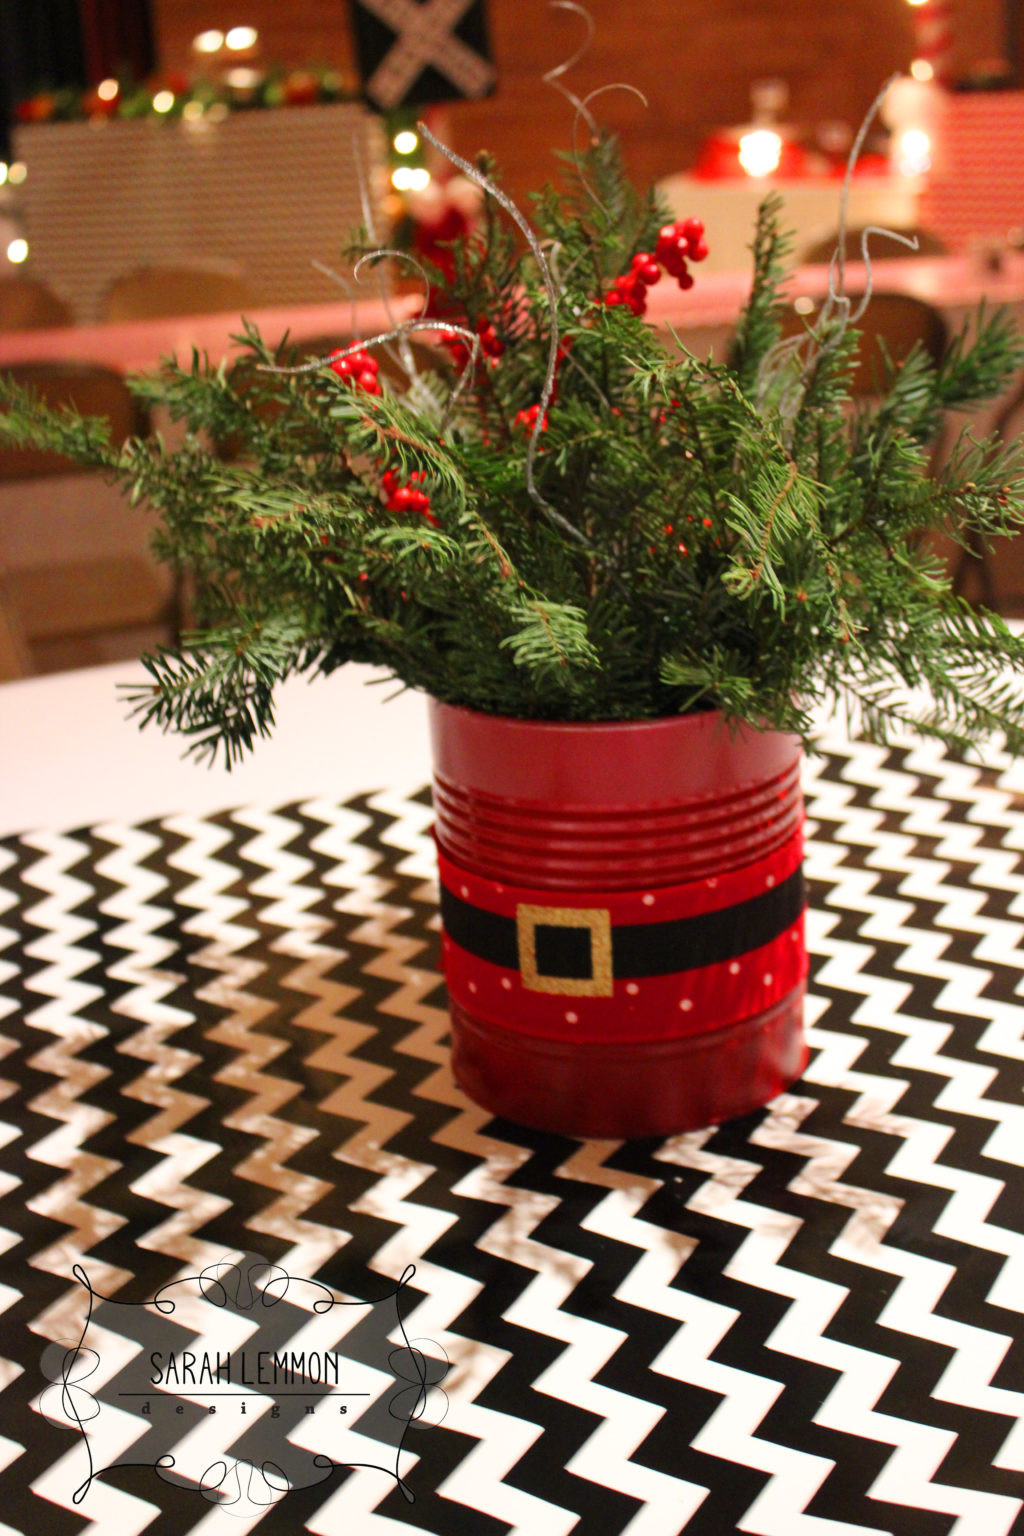 Holiday Party Centerpiece Ideas
 Christmas Table Centerpieces 25 Ideas To Get Inspired